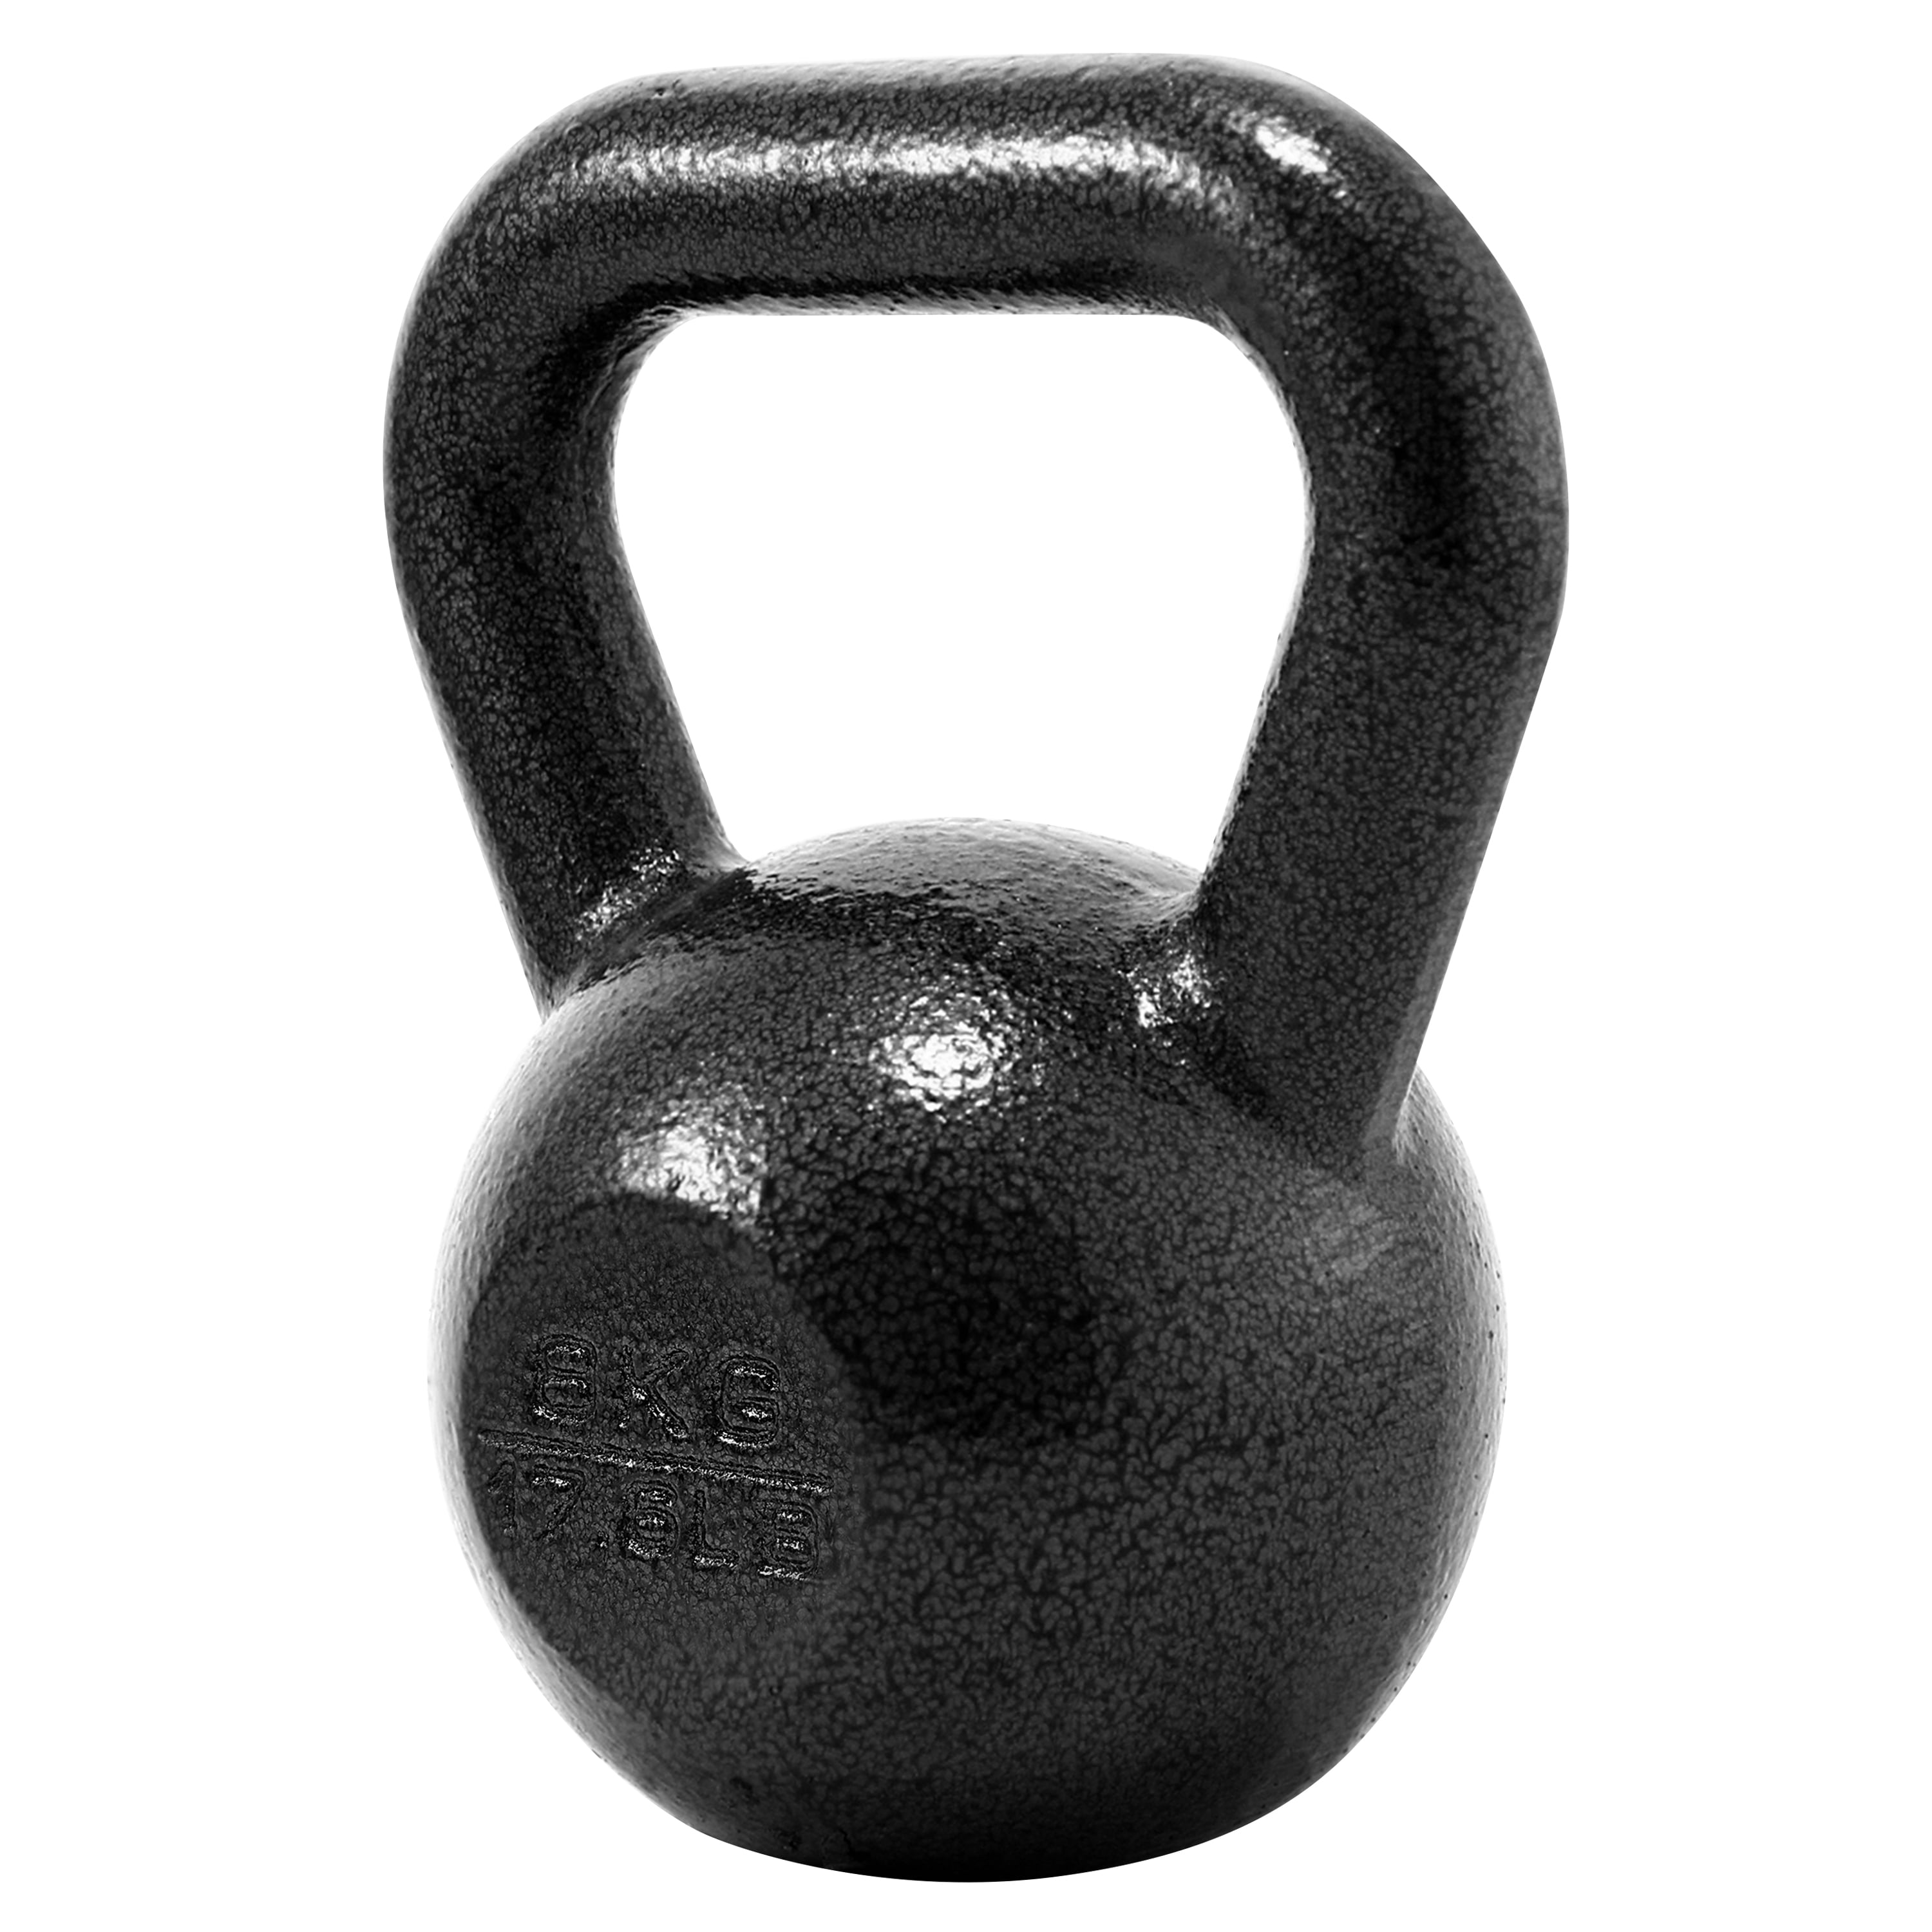 TKO Soft Kettle Bell 15 Pounds Iron Sand Filled Fast Neoprene for sale online 